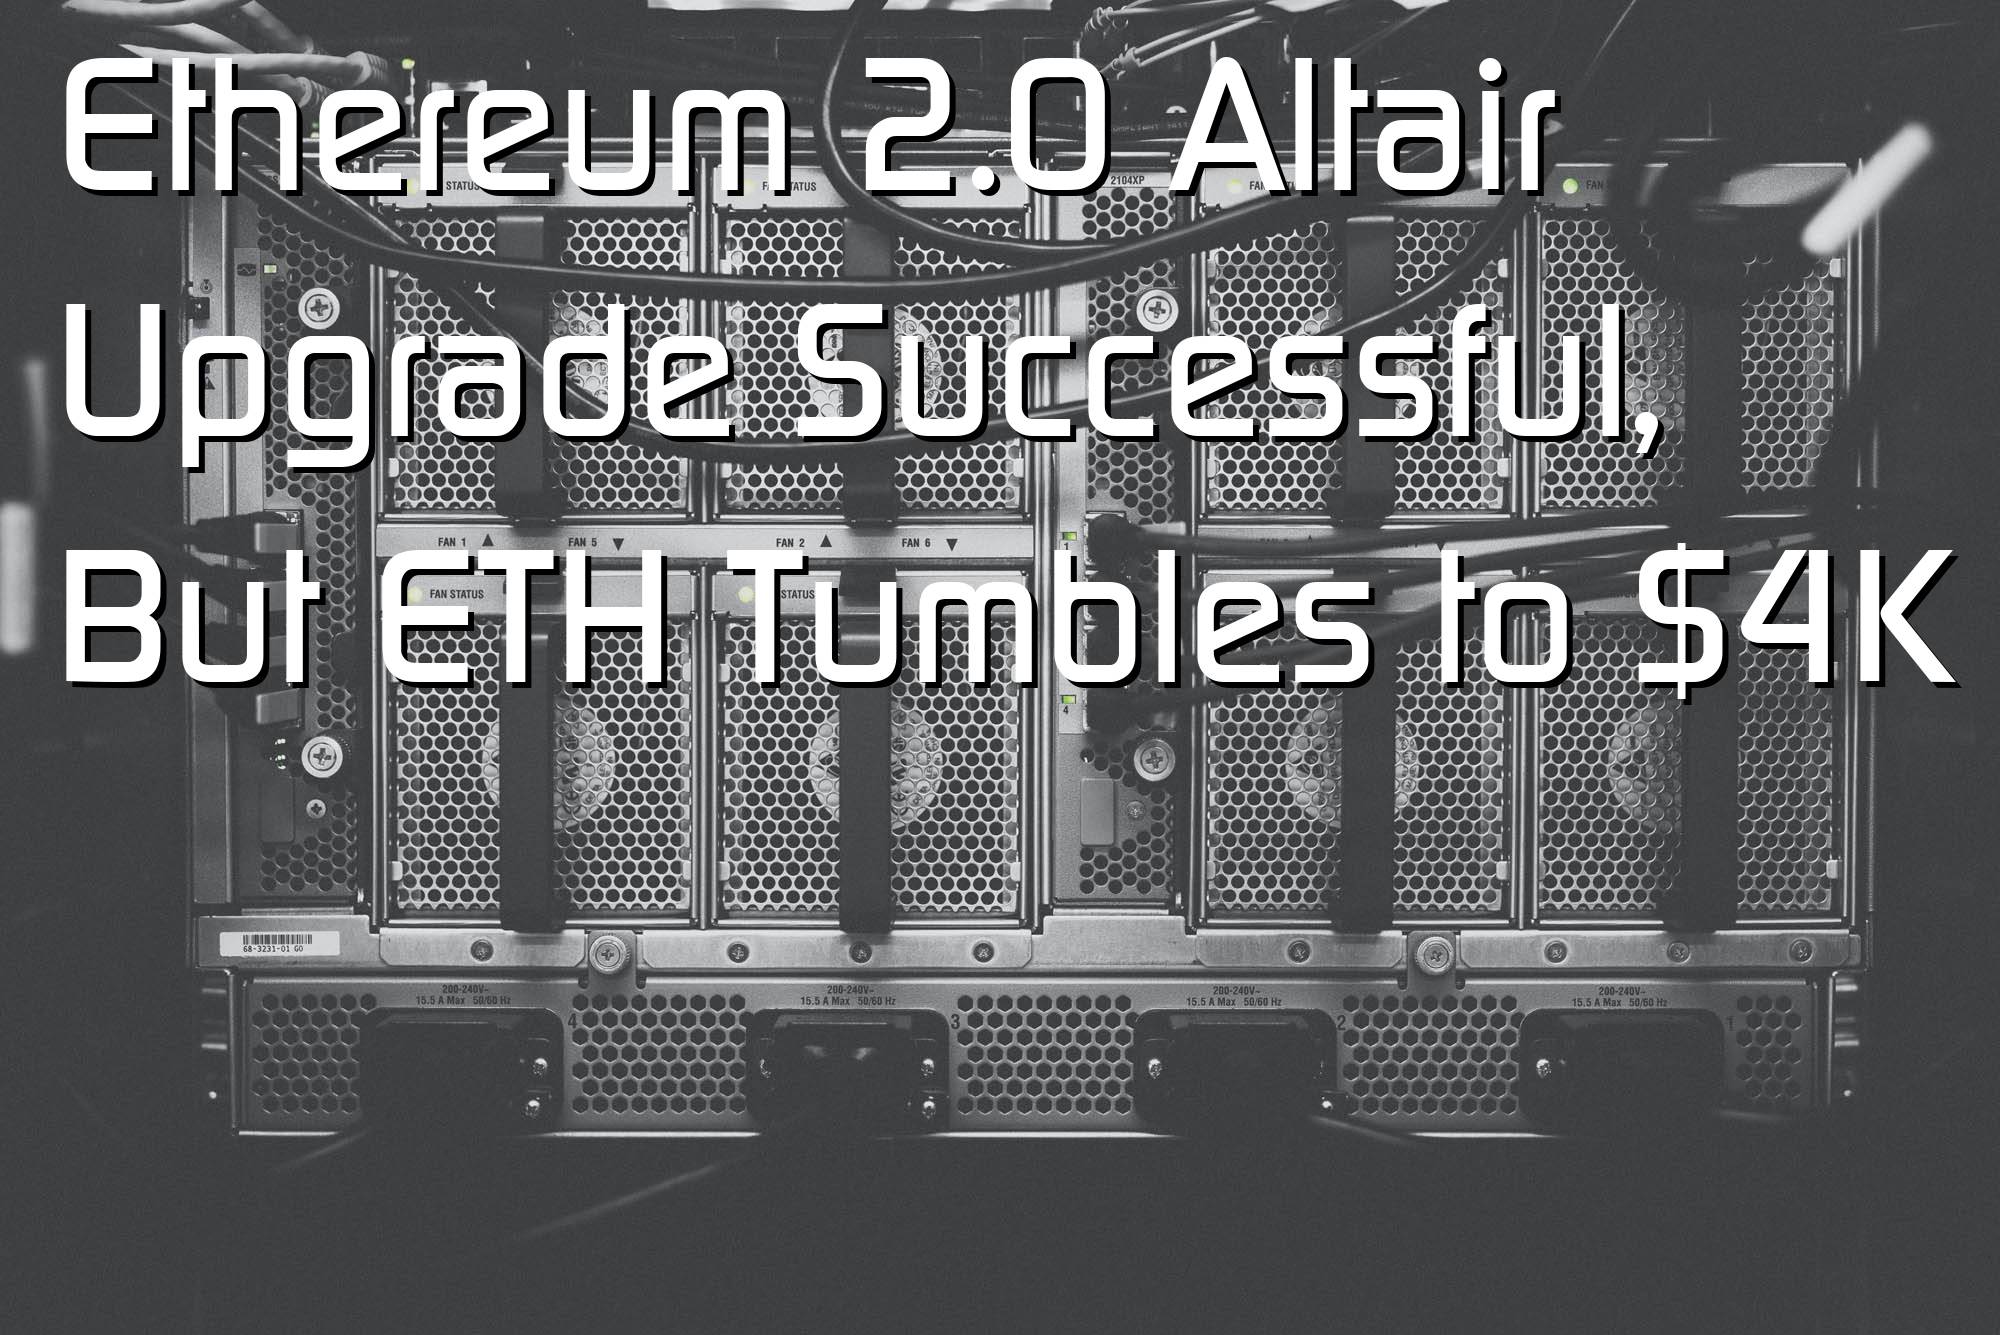 @$58926: Ethereum 2.0 Altair Upgrade Successful, But ETH Tumbles to $4K